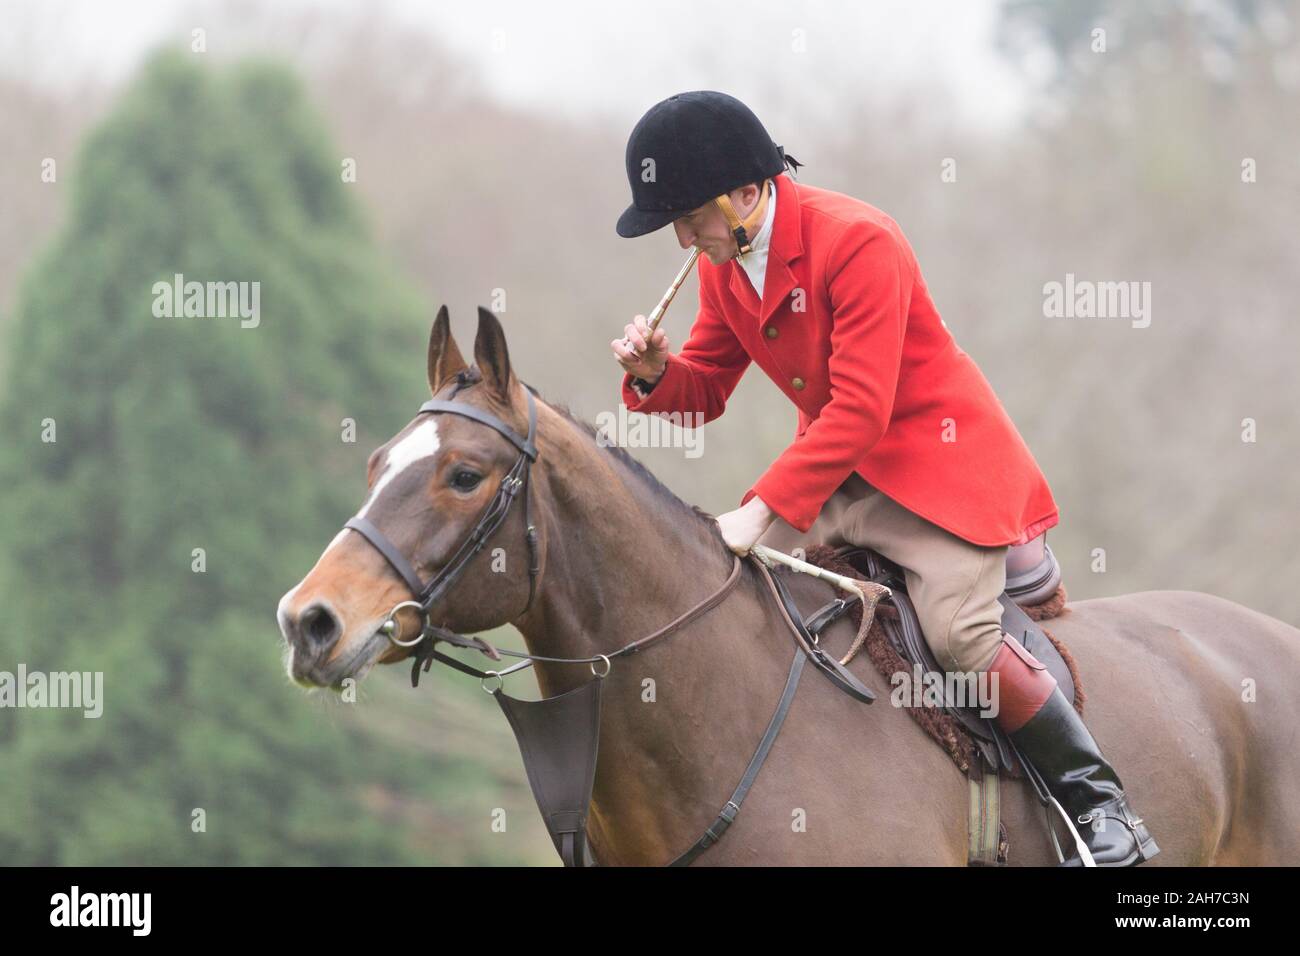 Hagley, Worcestershire, UK. 26th December 2019. The Albrighton and Woodland Hunt meets at Hagley Hall on Boxing Day for its traditional annual meet. Peter Lopeman/Alamy Live News Stock Photo